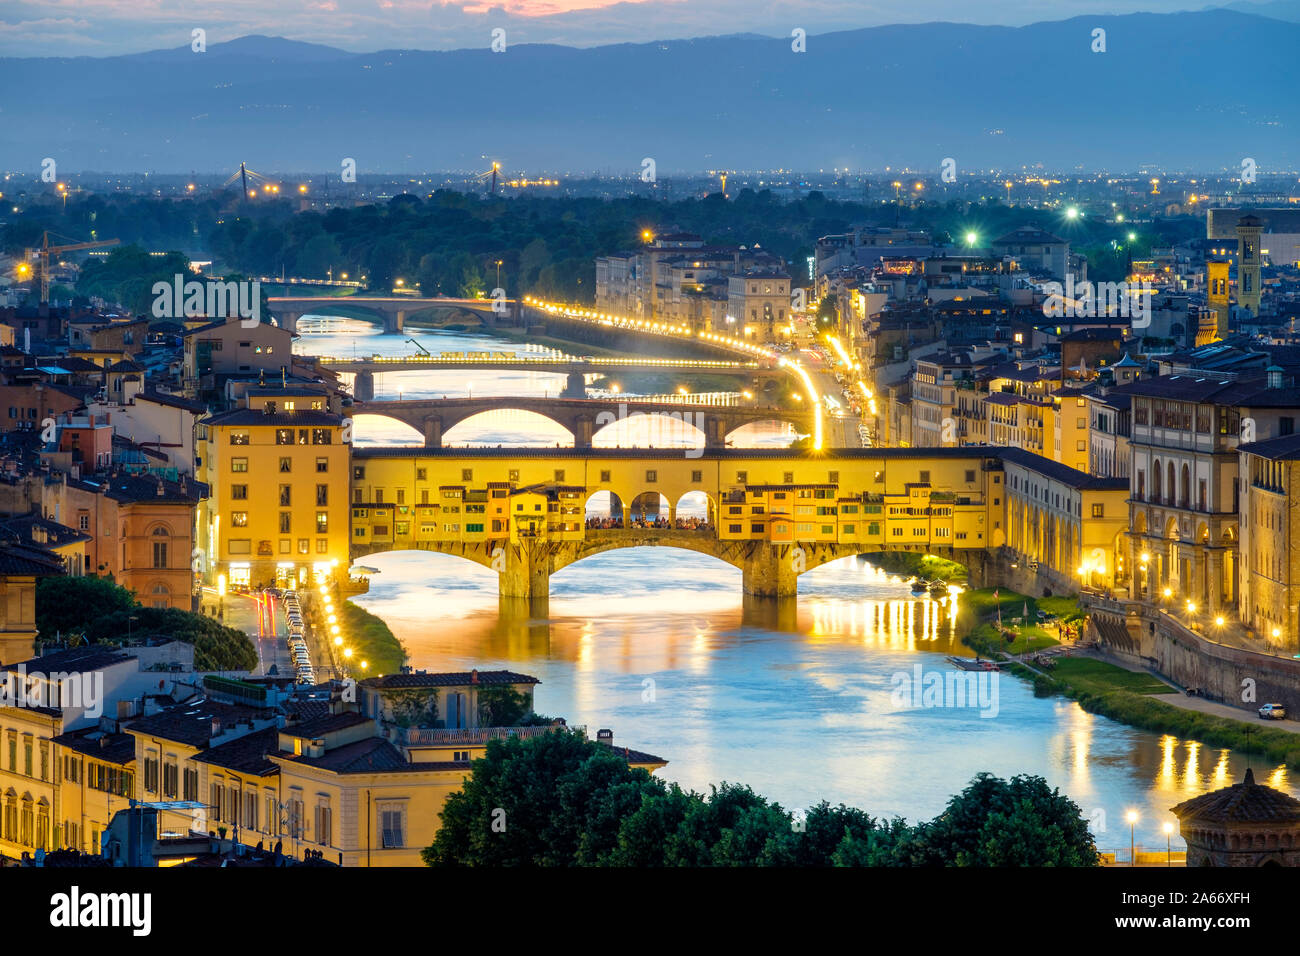 Ponte Vecchio on the Arno river and buildings in the old town at night, Florence (Firenze), Tuscany, Italy, Europe. Stock Photo